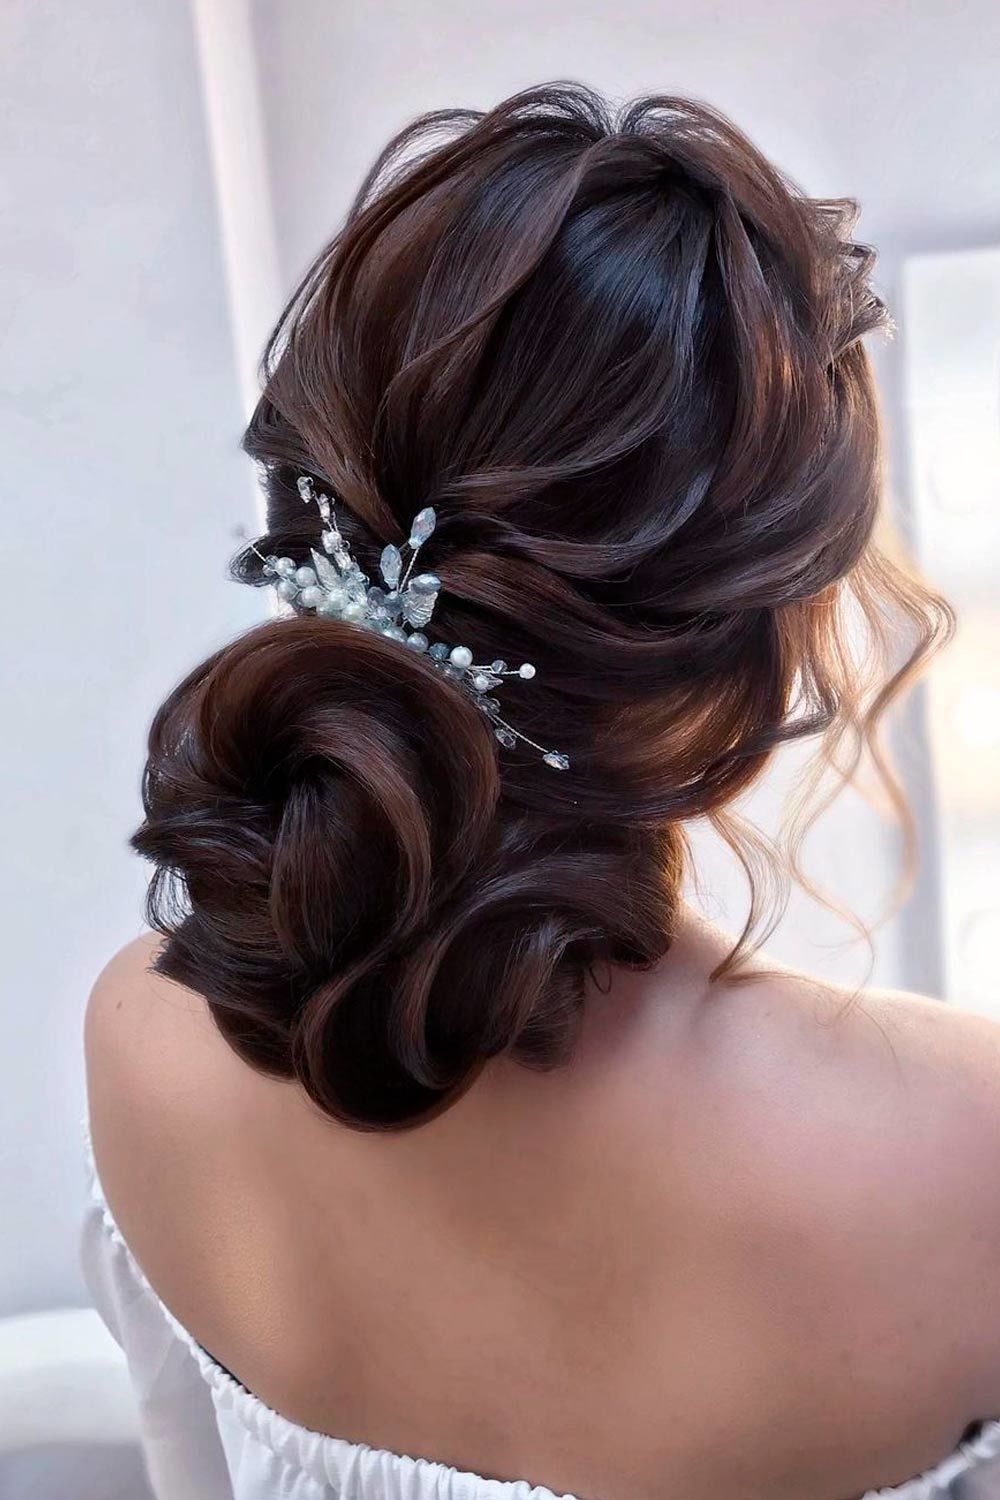 Hairstyles That Match Your Dress